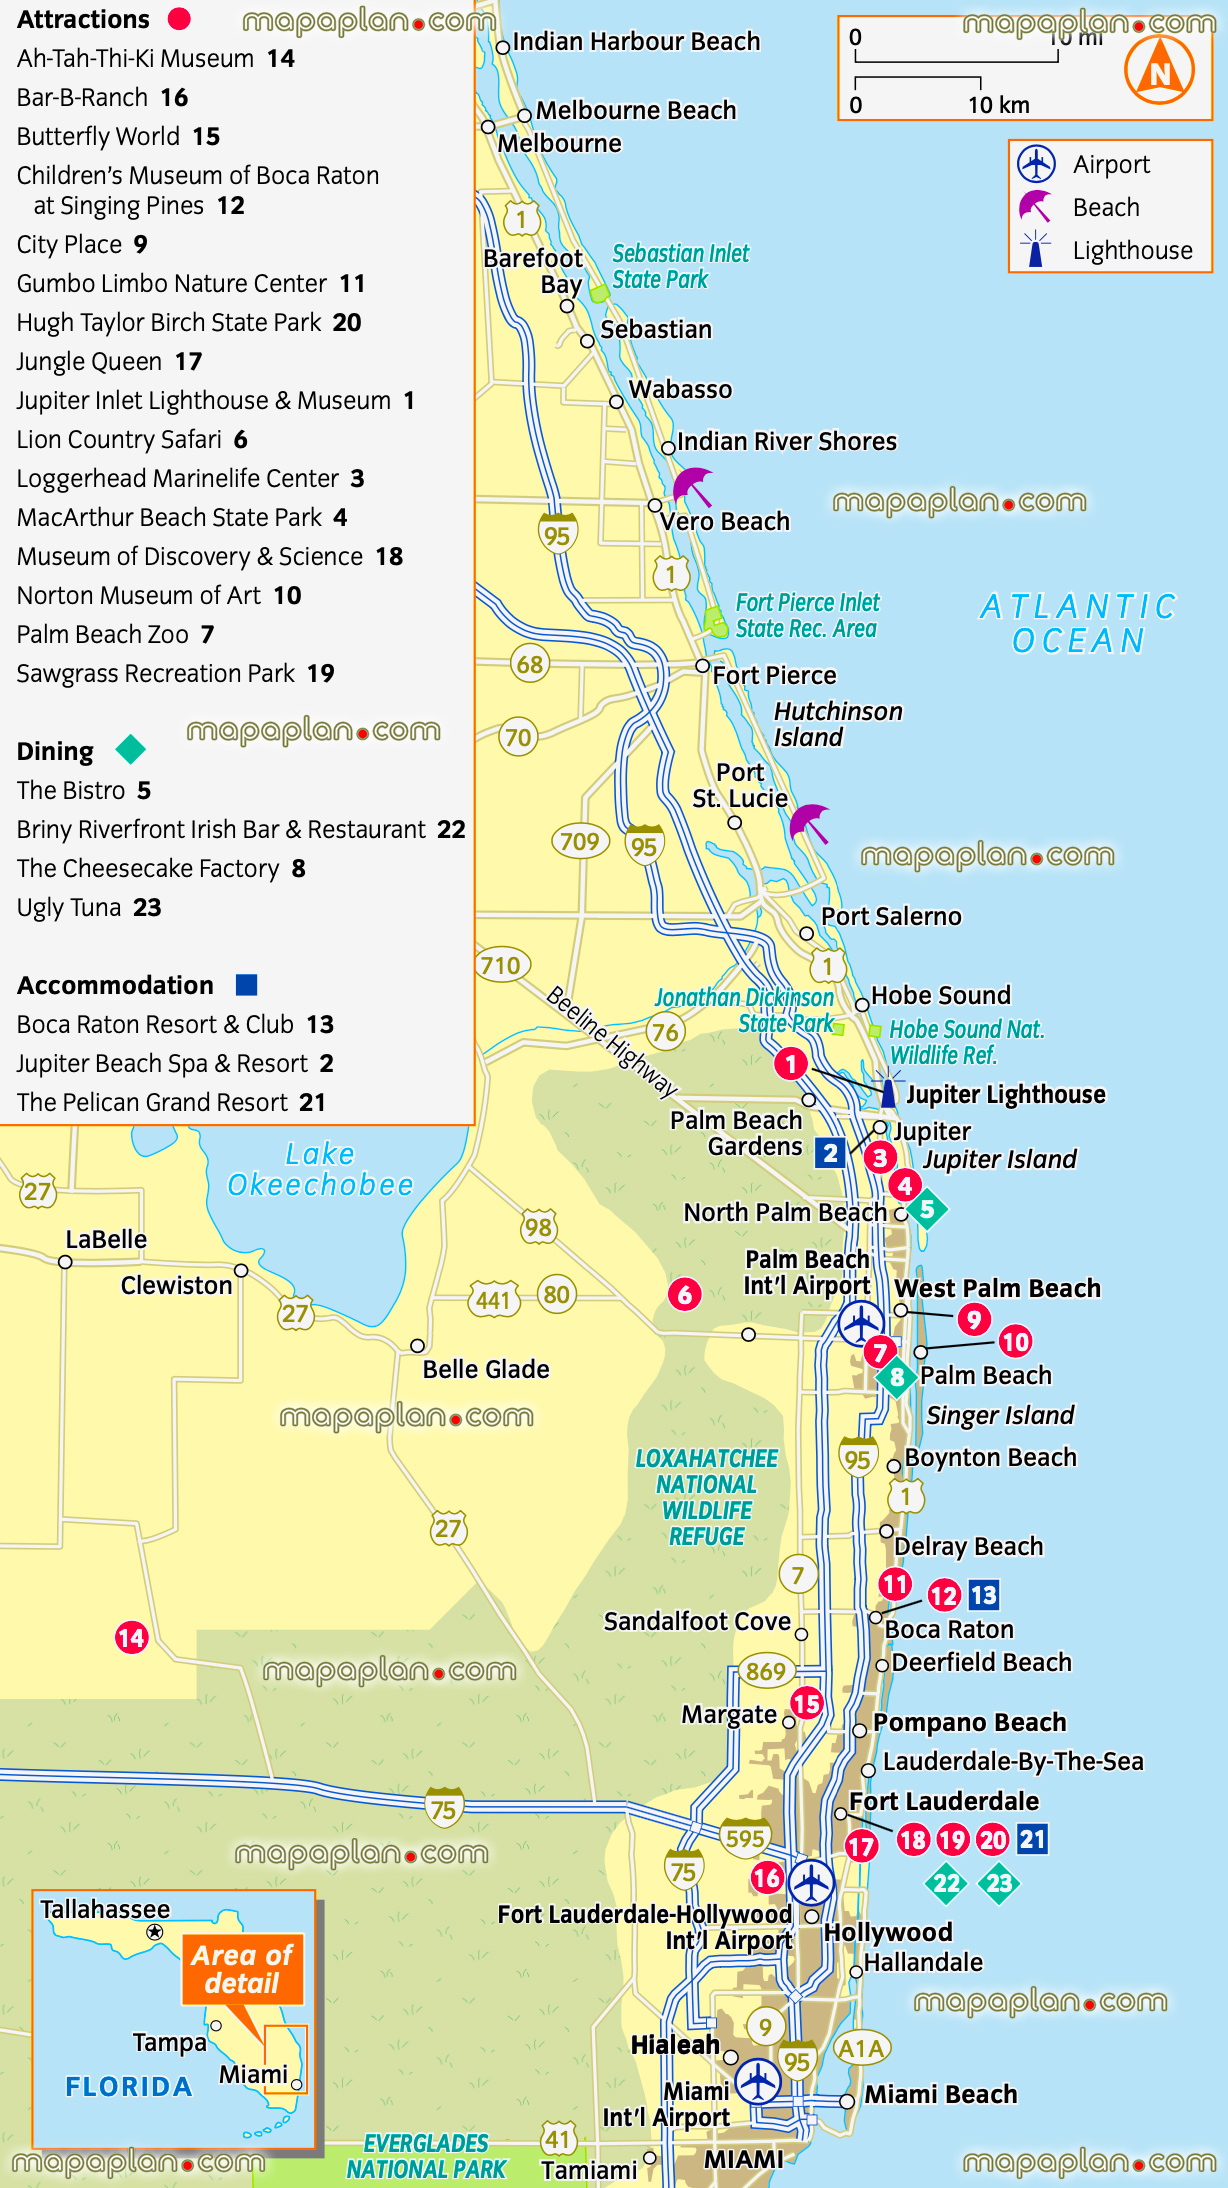 southeast florida coast Miami listing attractions children best museums zoos parks restaurants hotels virtual interactive 3d usa free printable visitors detailed tourist guide download must see sights sightseeing places interest